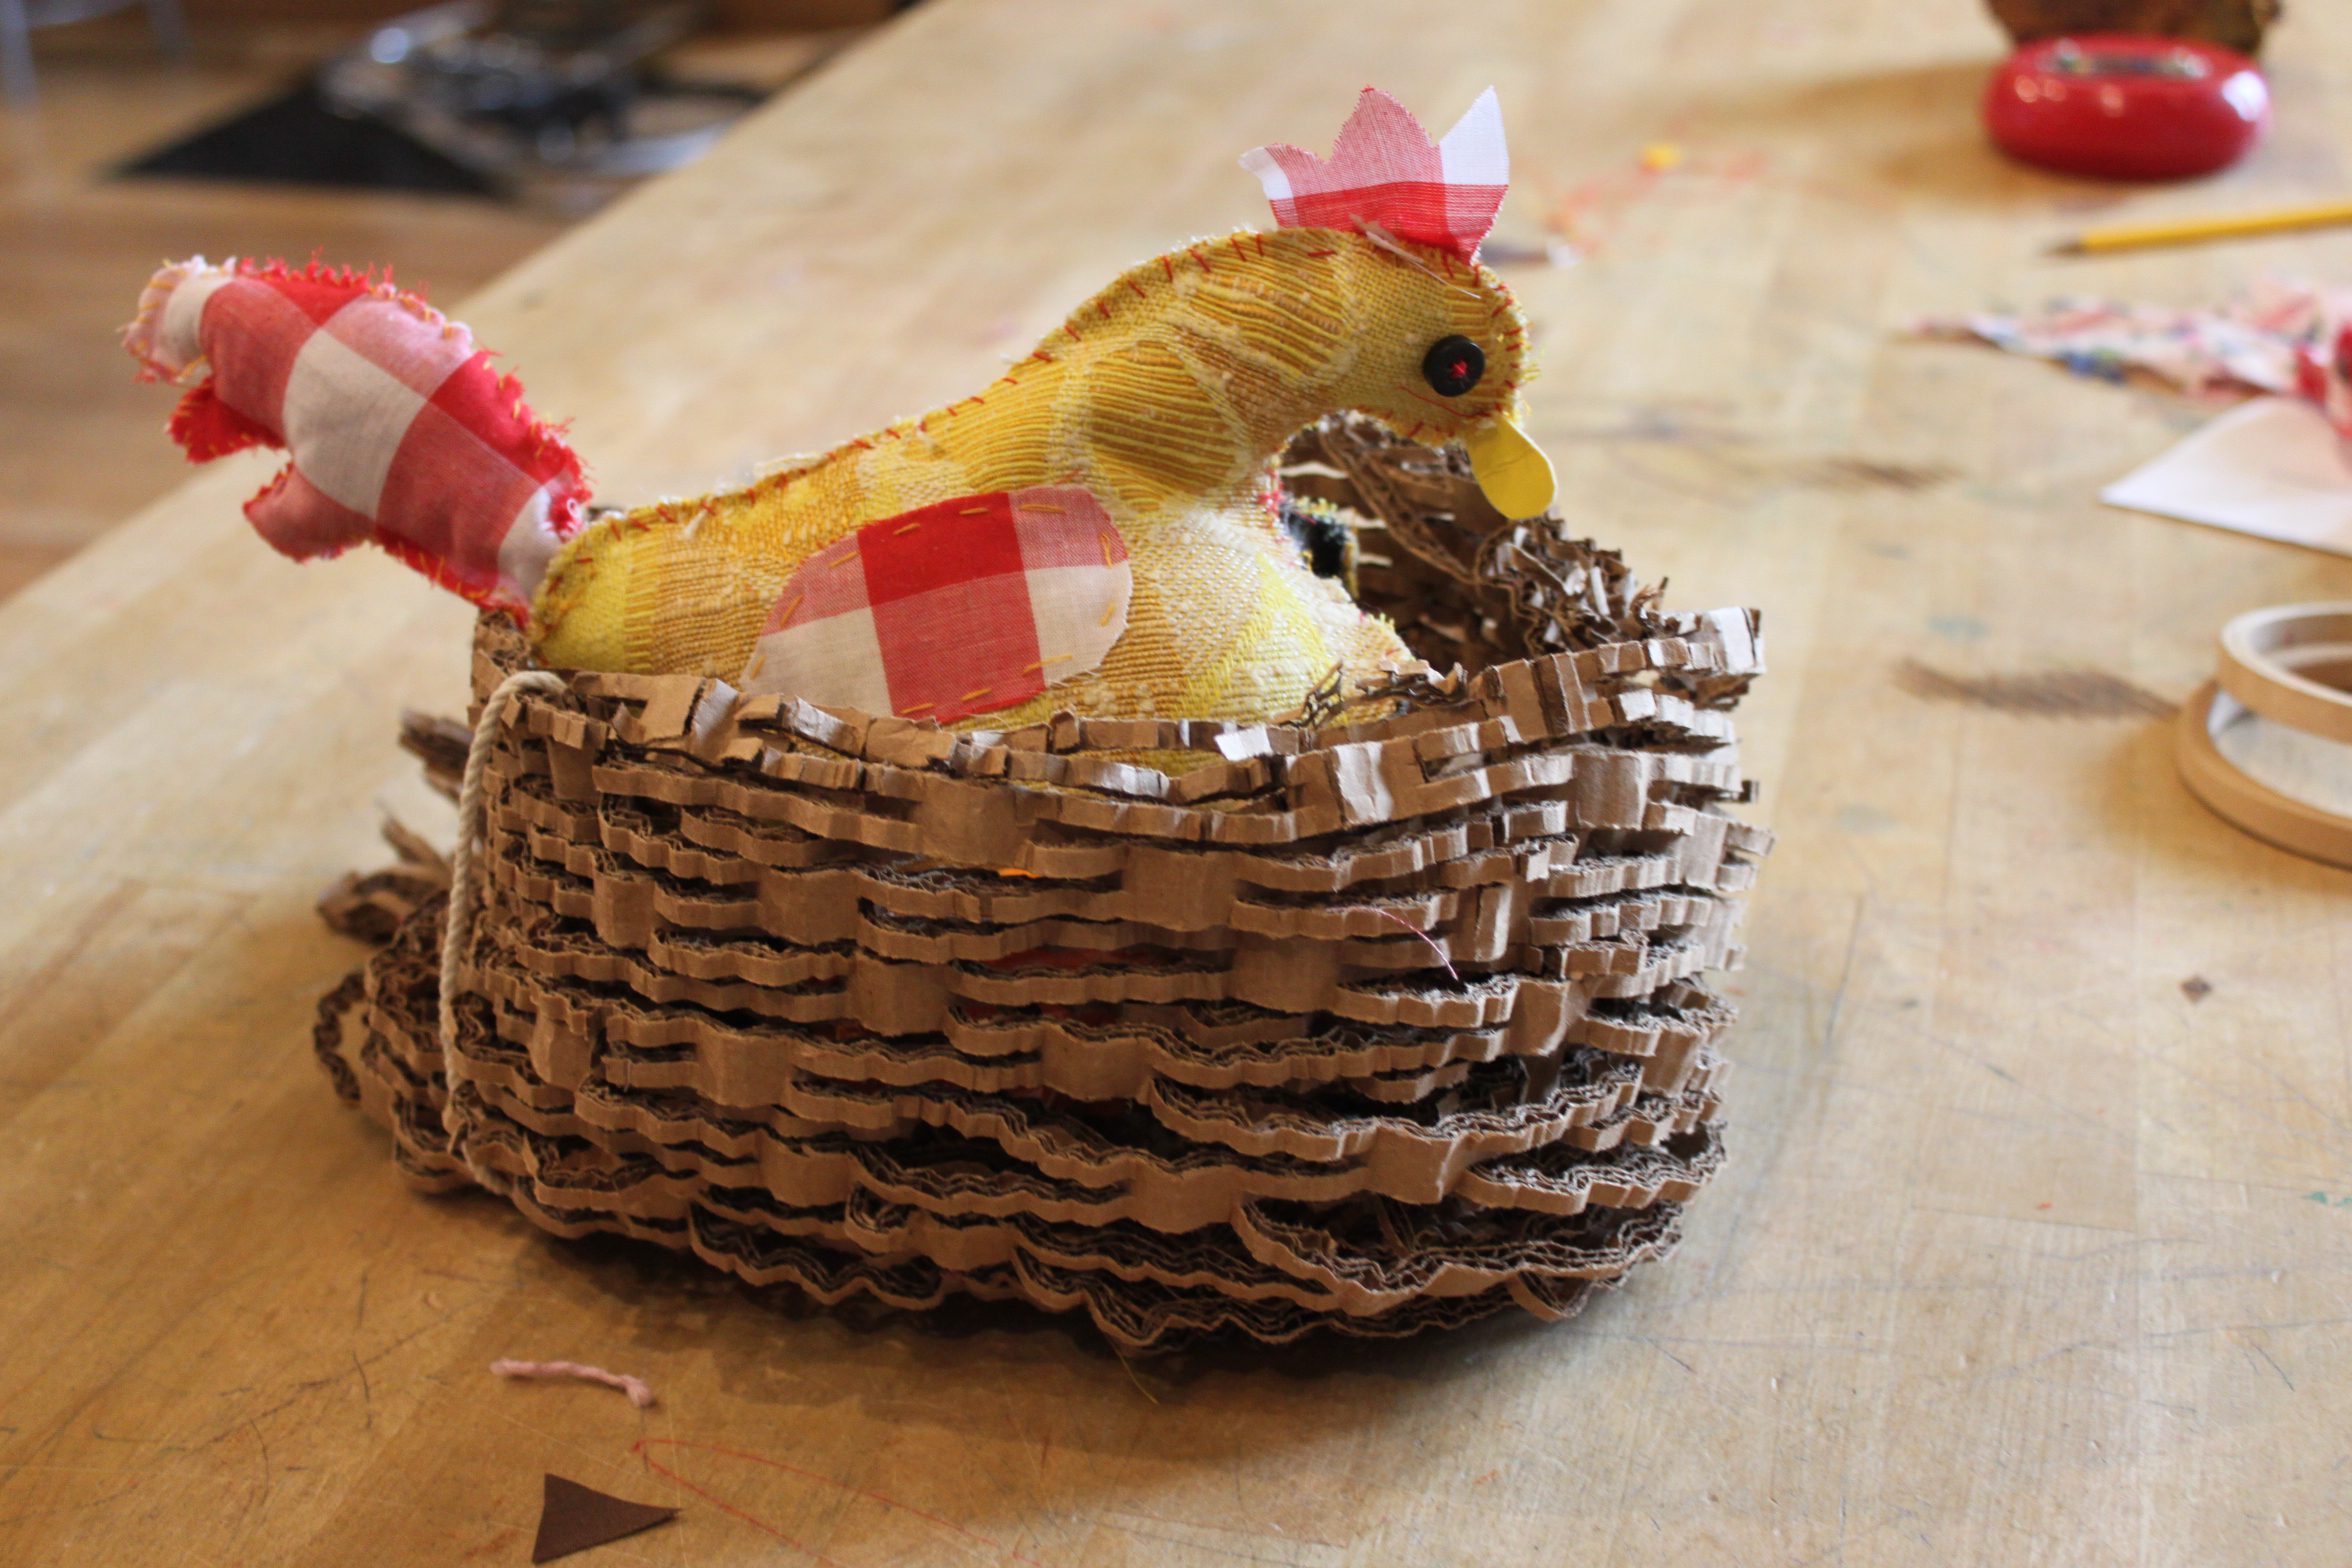 A hand sewn stuffed chicken sits in a recycled paper nest.